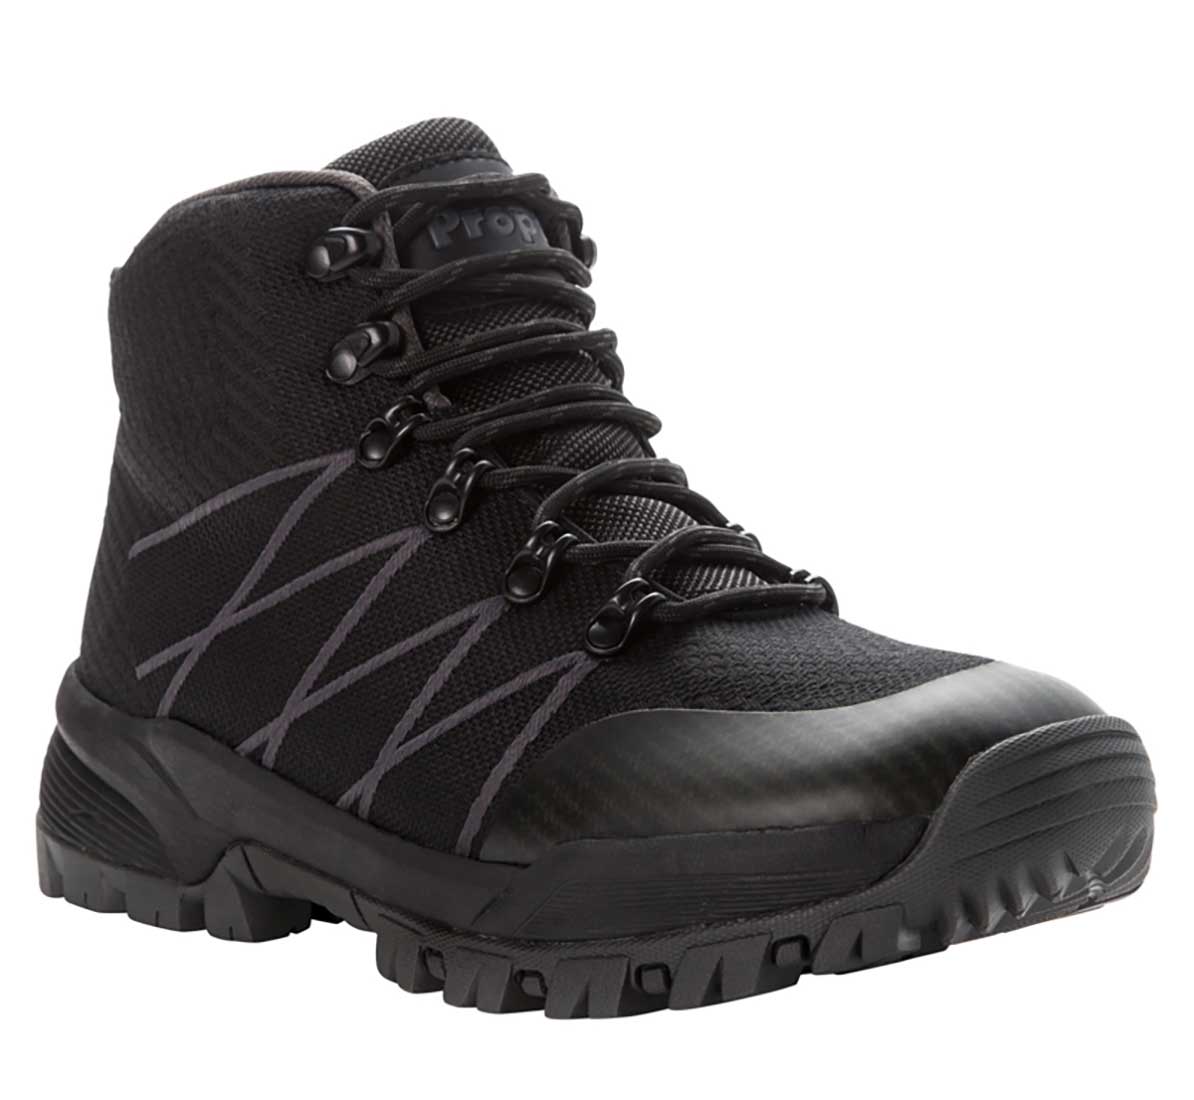 Propet Traverse MBA042K Men's 6 Casual, Comfort, Diabetic Hiking Boot - Extra Depth For Orthotics